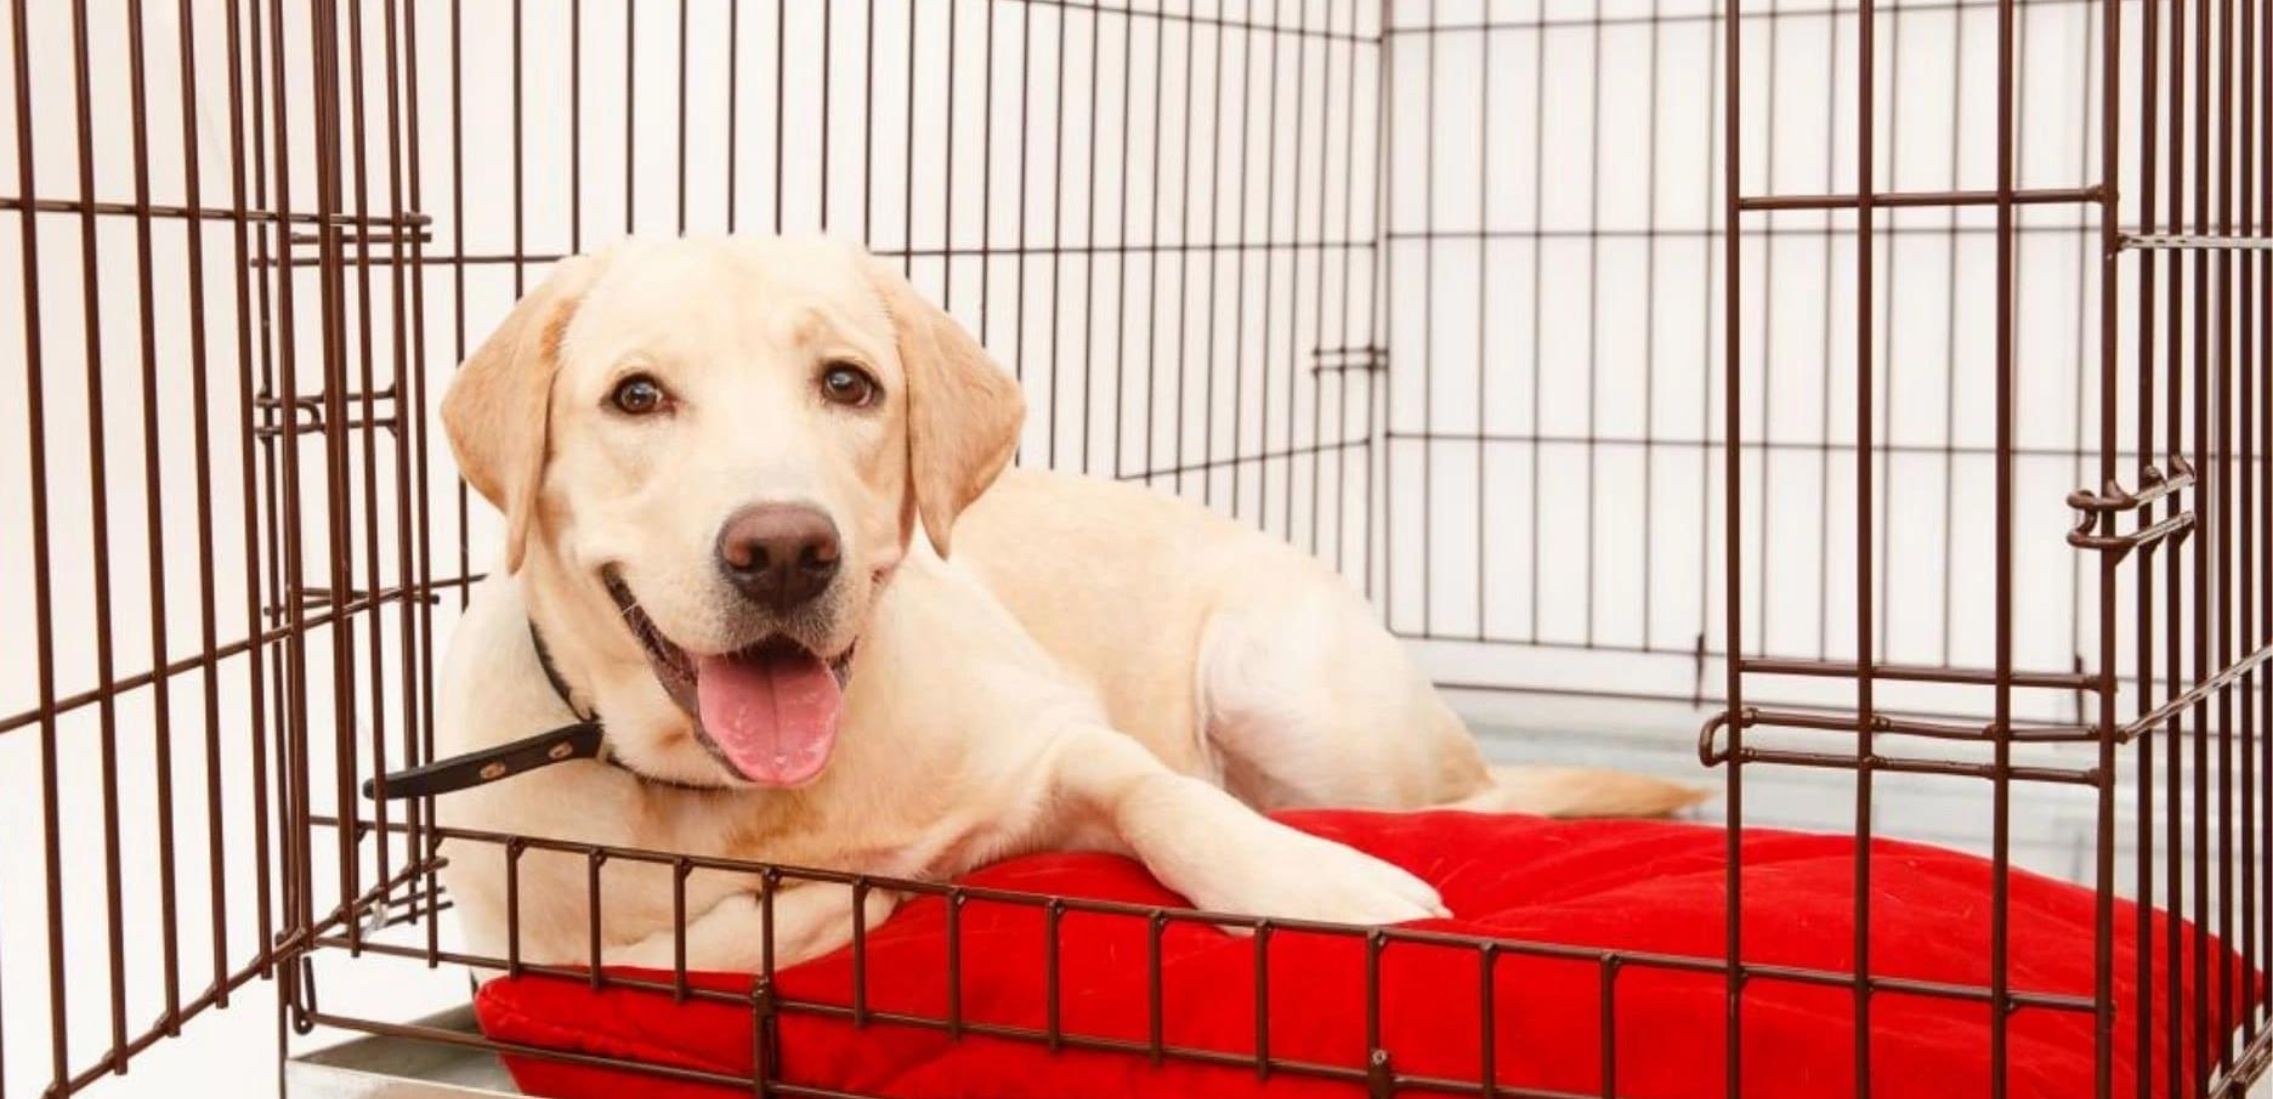 Dog lying in crate